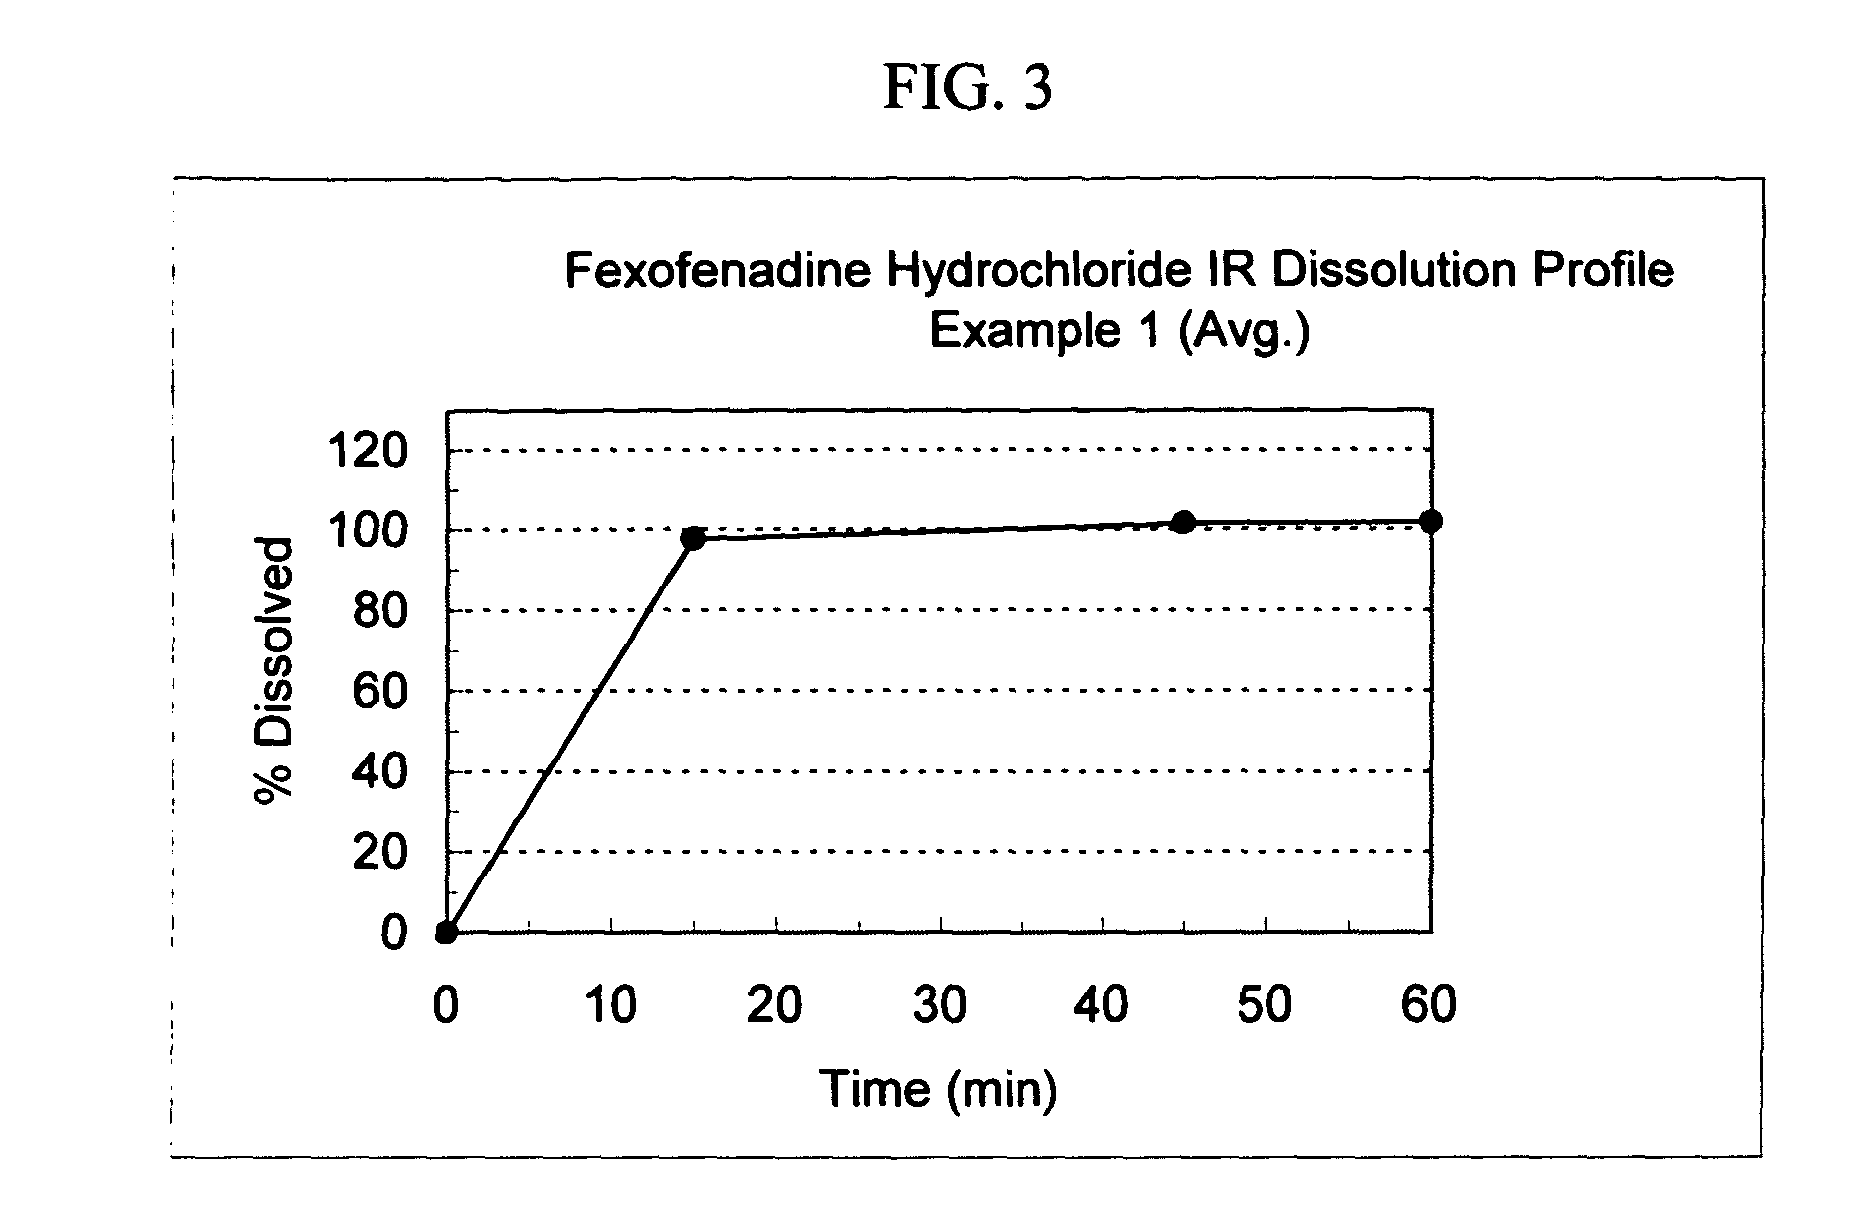 Osmotic device containing pseudoephedrine and an H1 antagonist